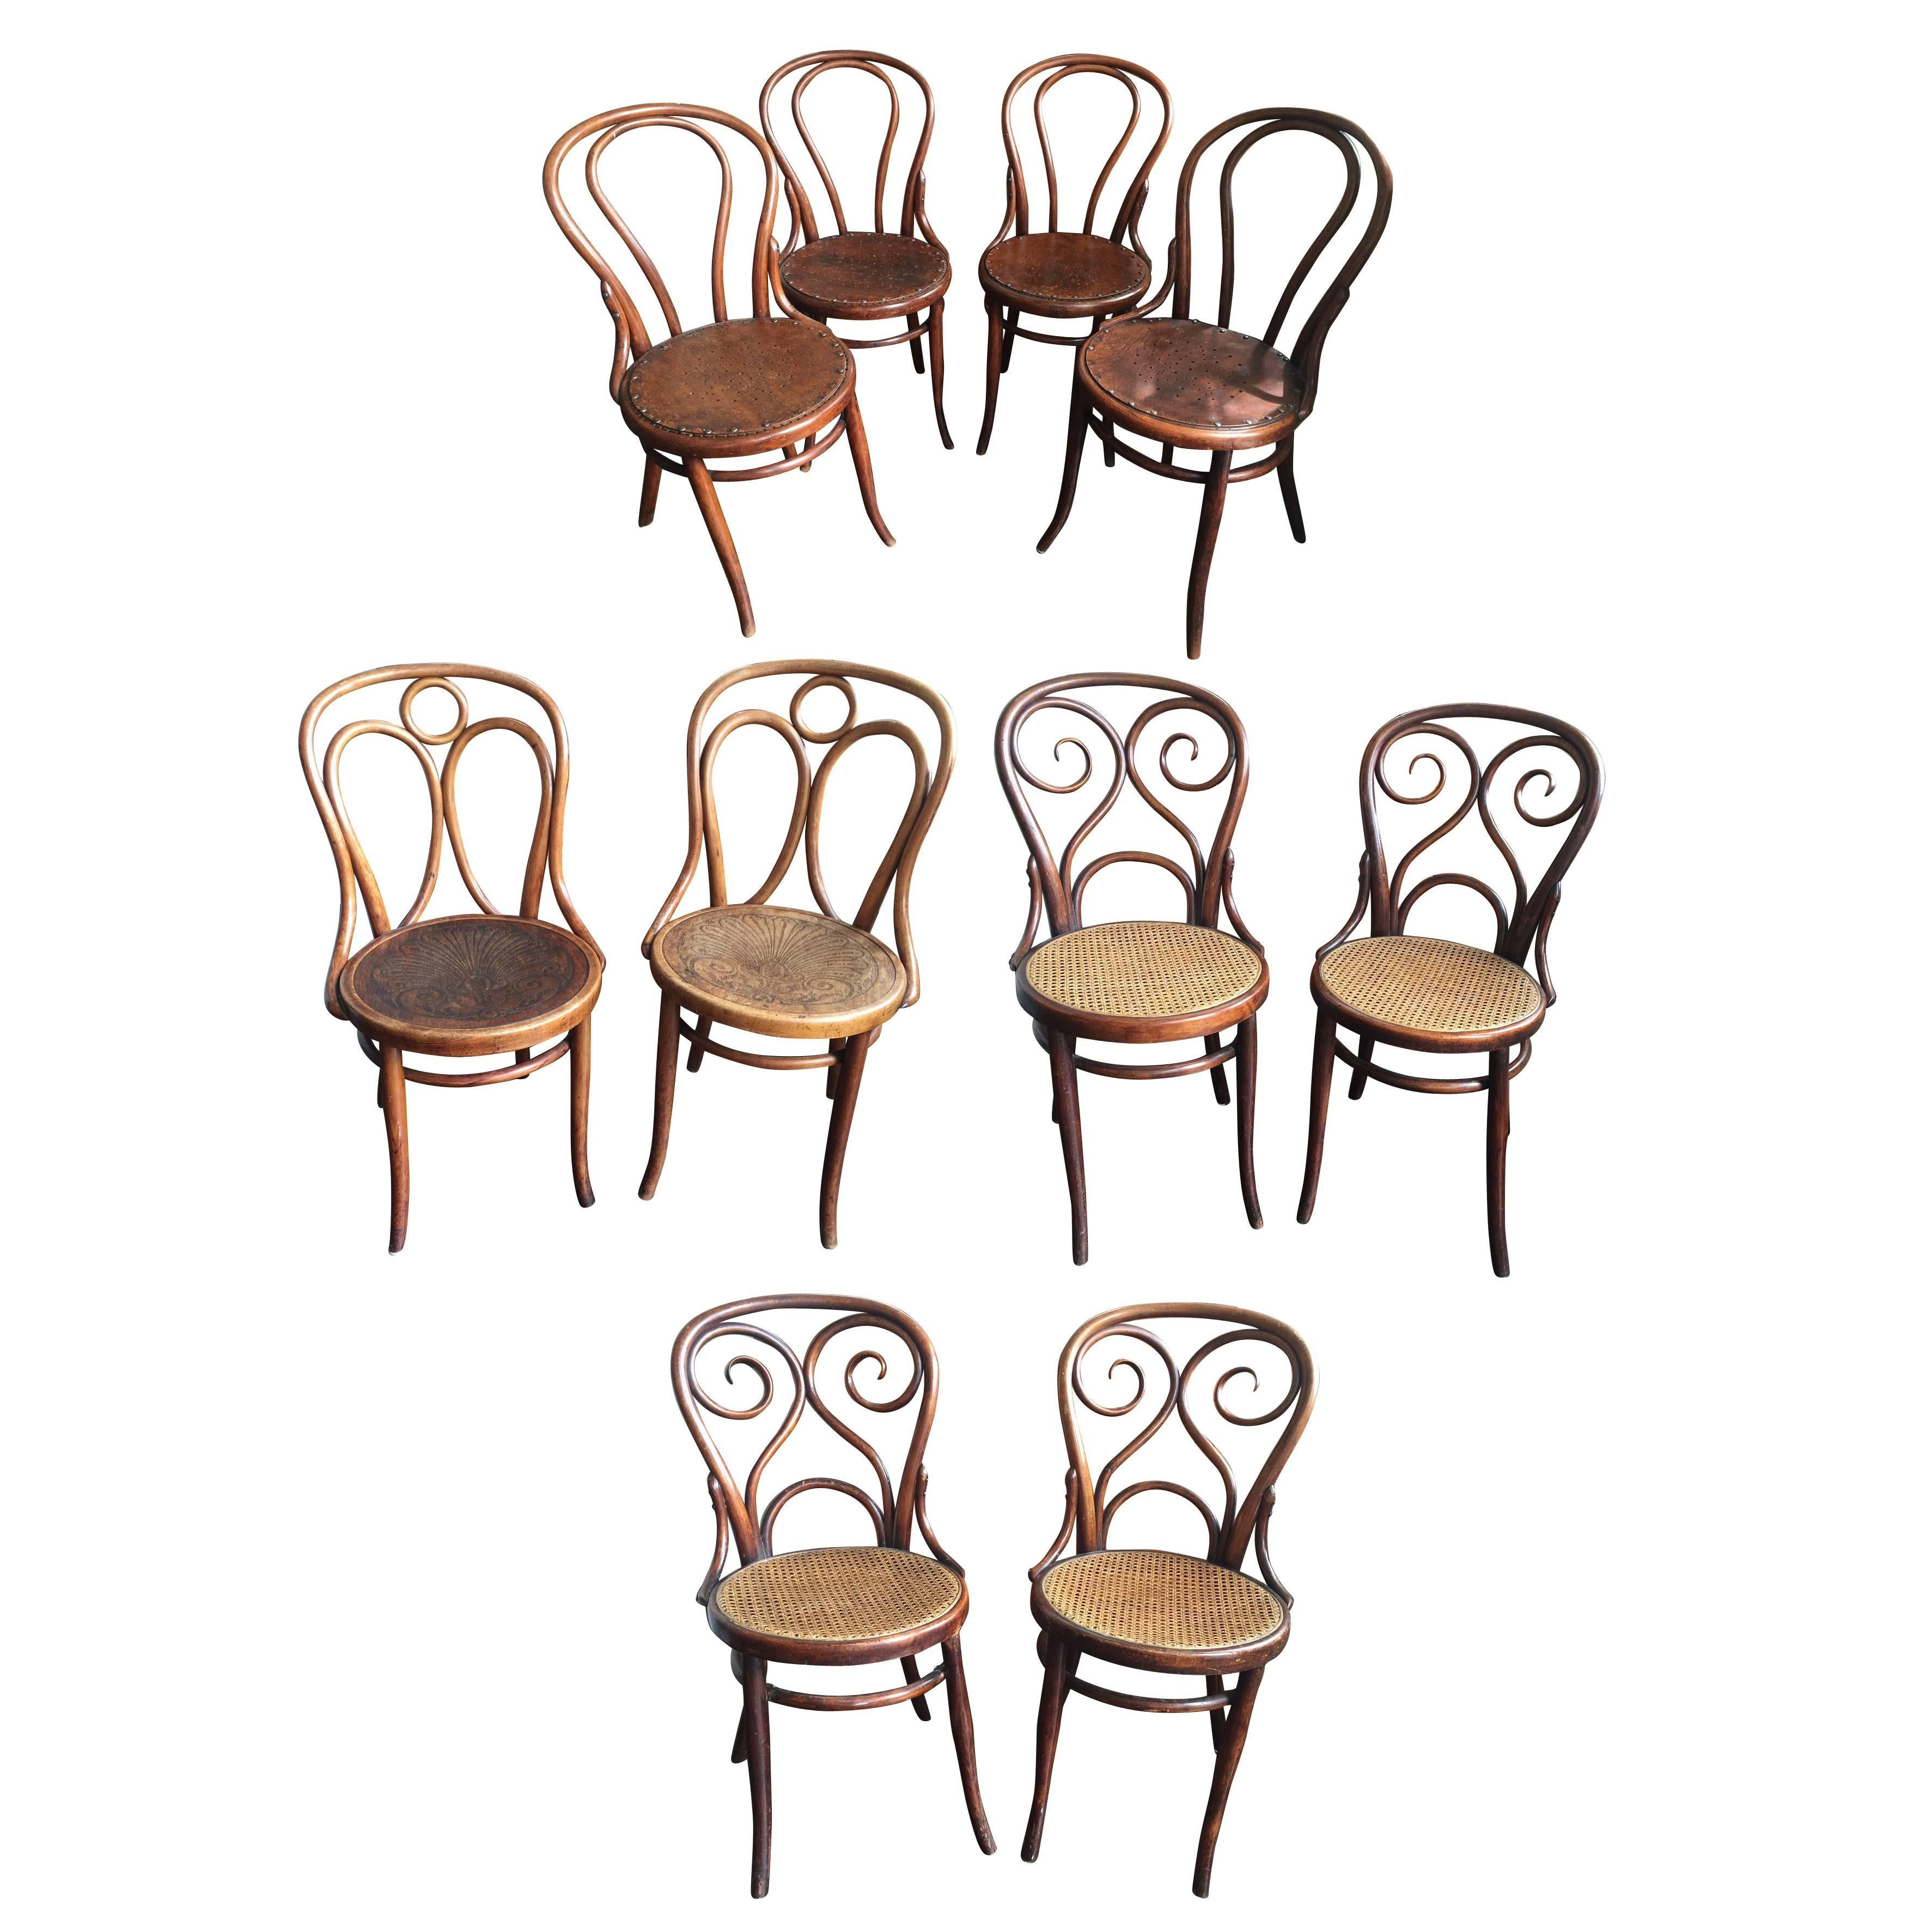 Set of Ten Turn-of-the-Century Bentwood Dining Chairs by Thonet